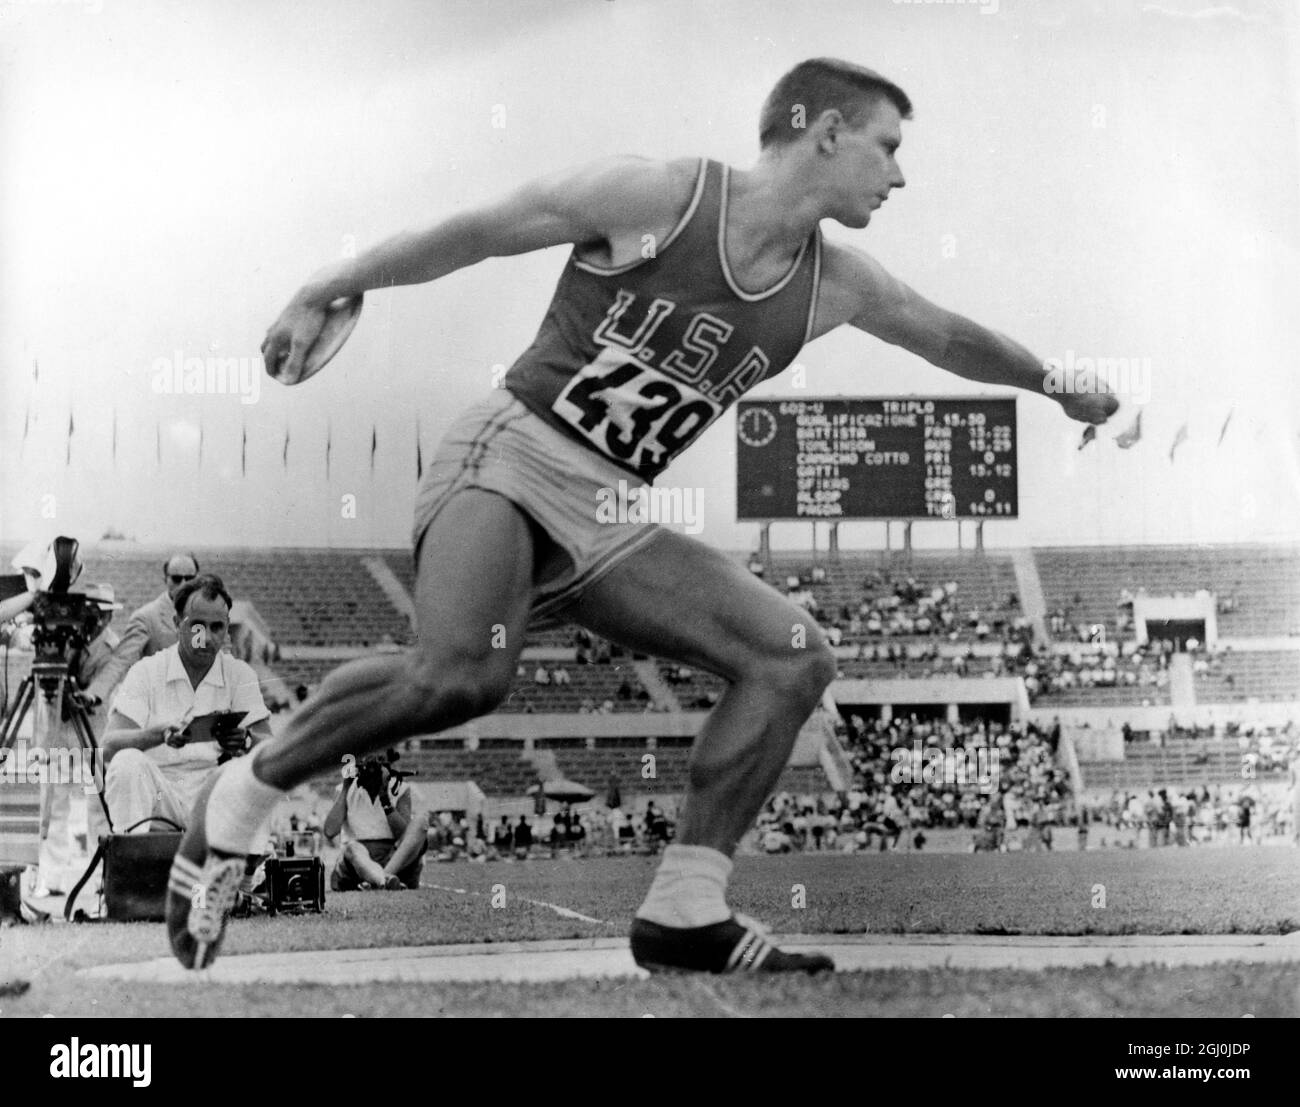 24 year old Al Oerter of the United States who broke the Olympic record with a throw of 191 feet 8 1-4 inches in the qualifying round of the discus. He went on to win the gold medal 7th August 1960 1960 Rome Olympics Stock Photo